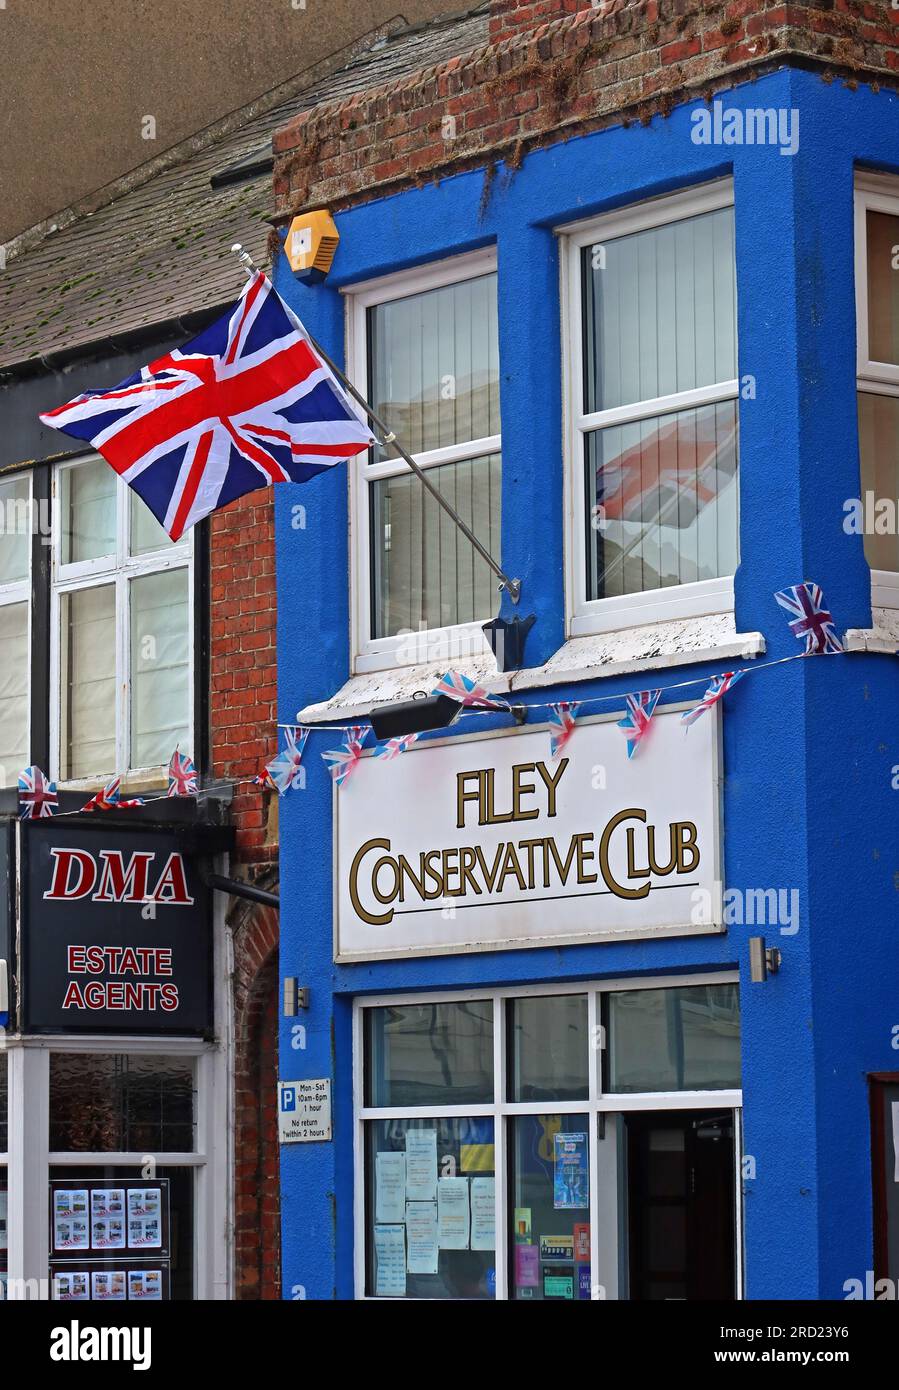 Filey con Club, 24 Belle vue St, Filey, Yorkshire du Nord, Angleterre, Royaume-Uni, YO14 9HY Banque D'Images